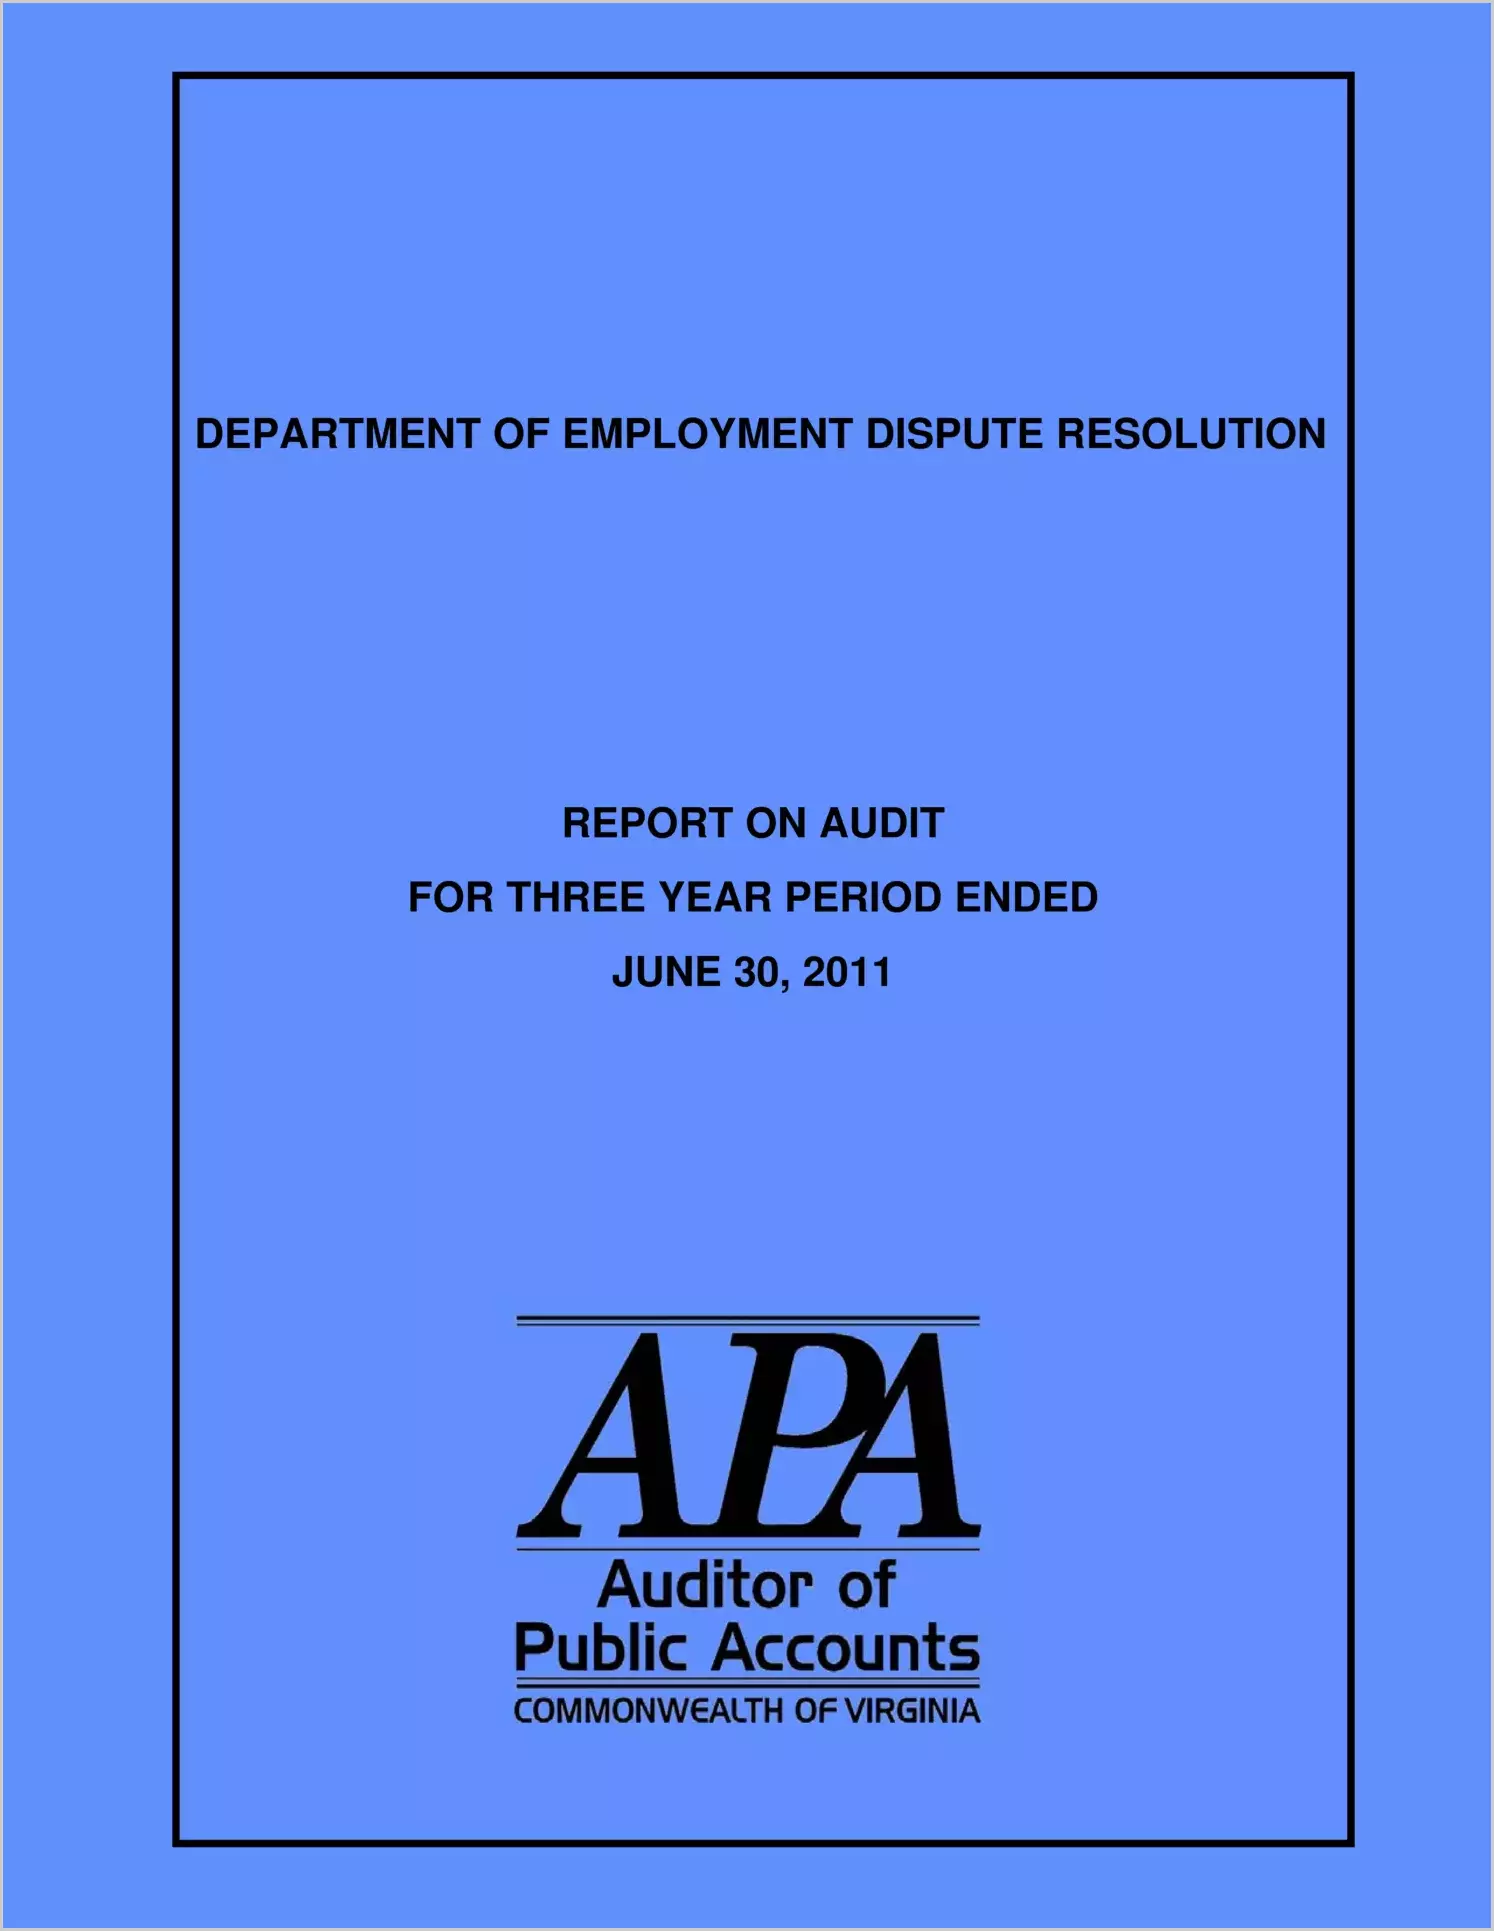 Department of Employment Dispute Resolution for the three-year period ended June 30, 2011